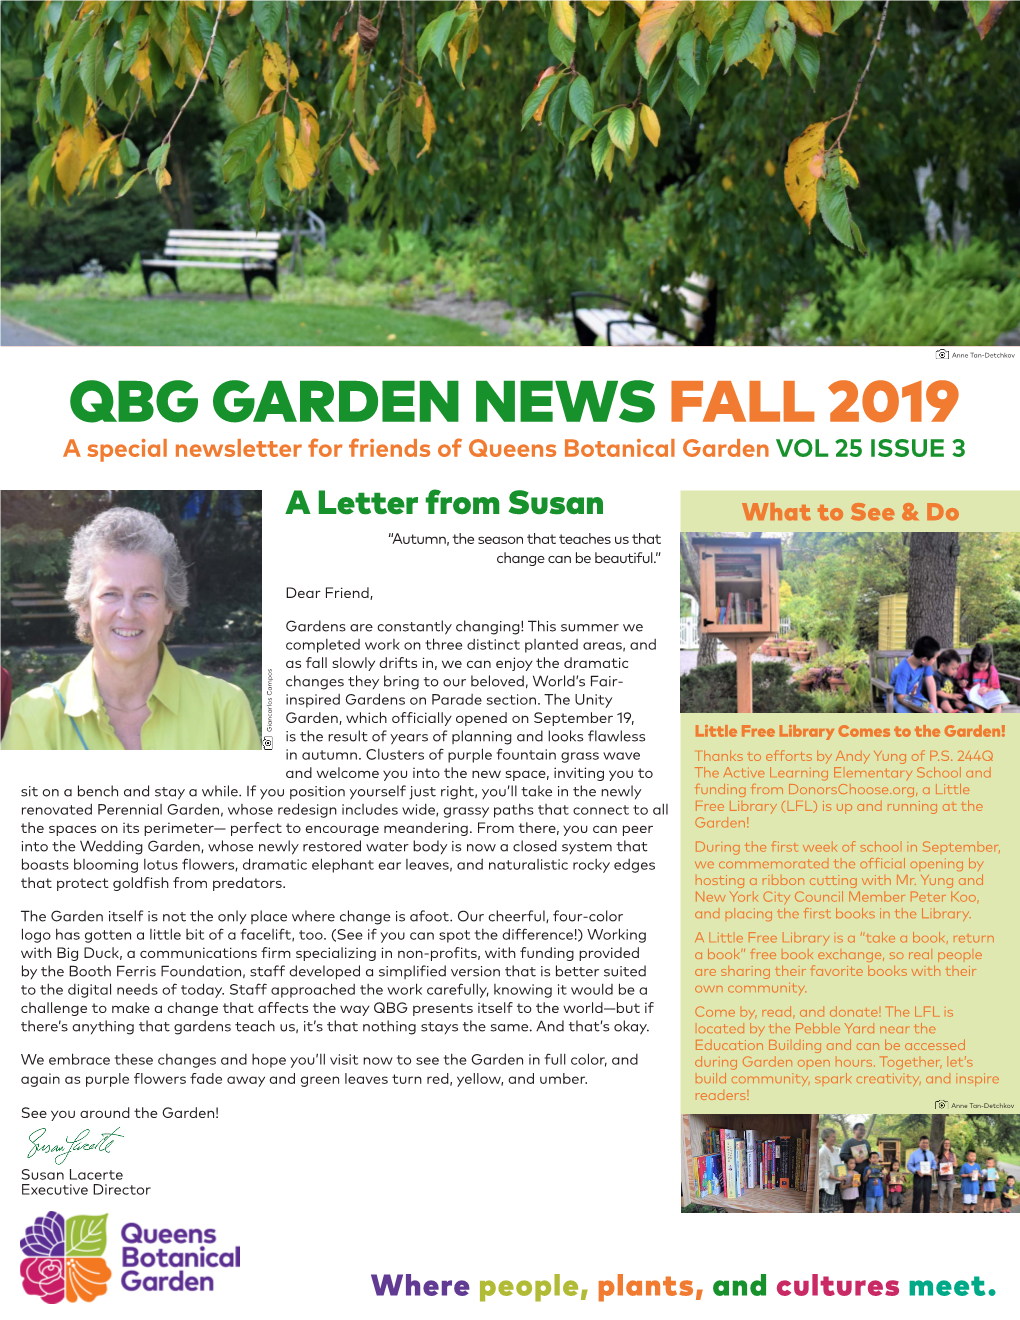 FALL 2019 a Special Newsletter for Friends of Queens Botanical Garden VOL 25 ISSUE 3